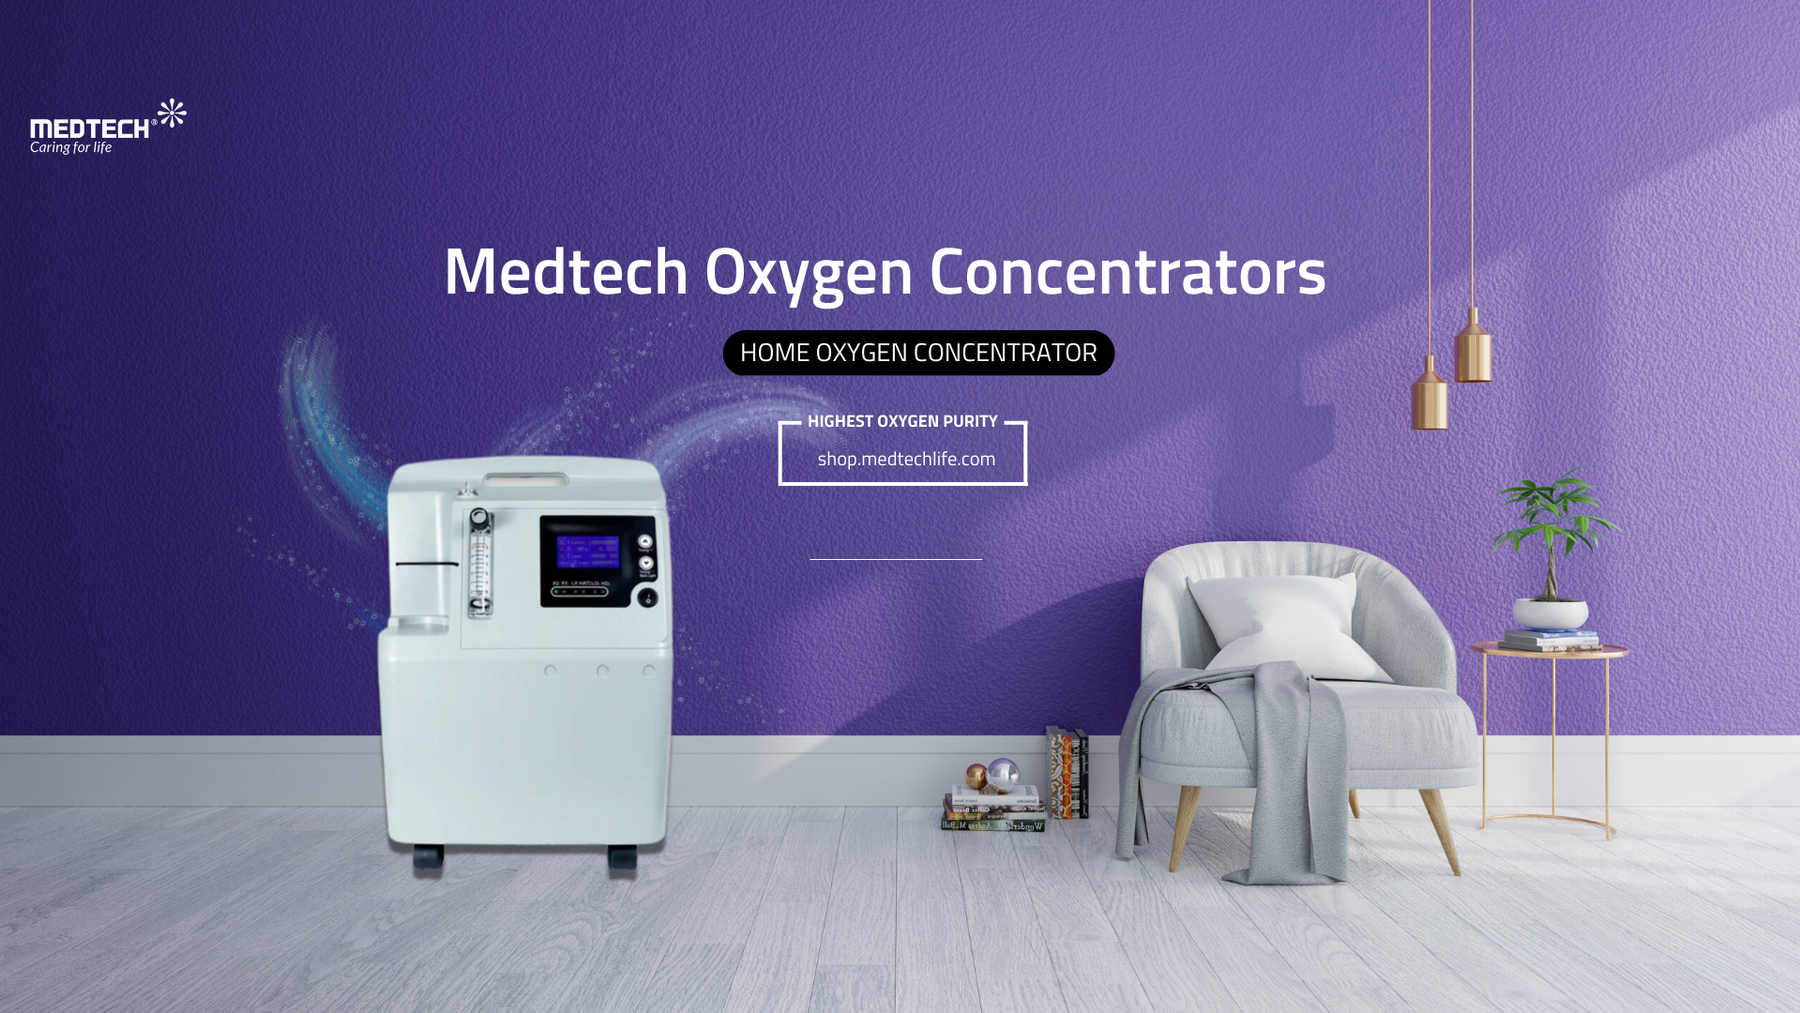 How Oxygen concentrator works and helps raise oxygen level